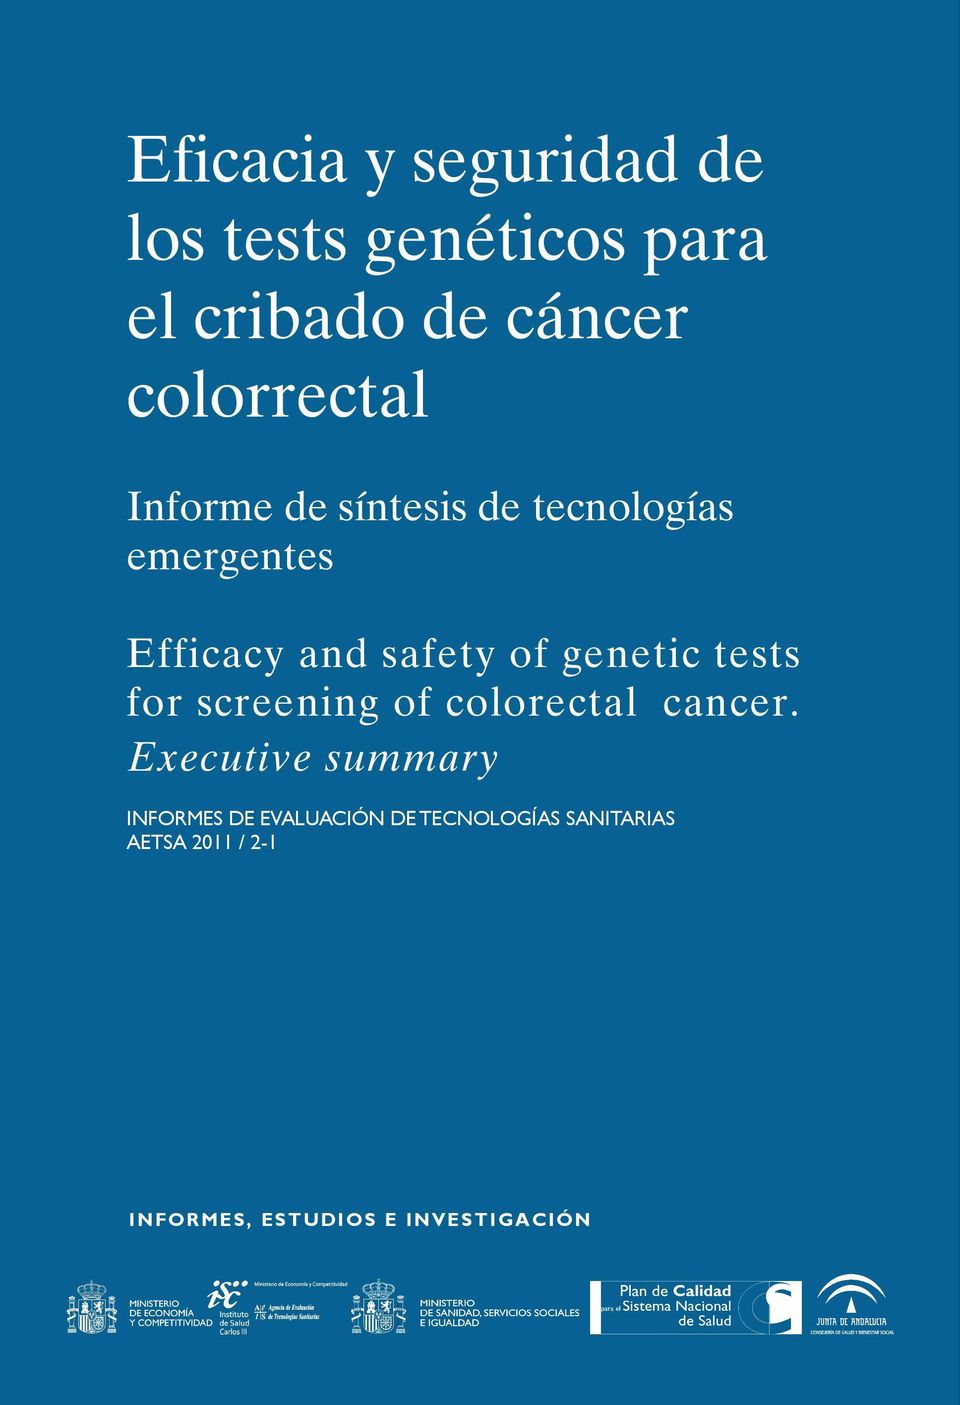 of genetic tests for screening of colorectal cancer.